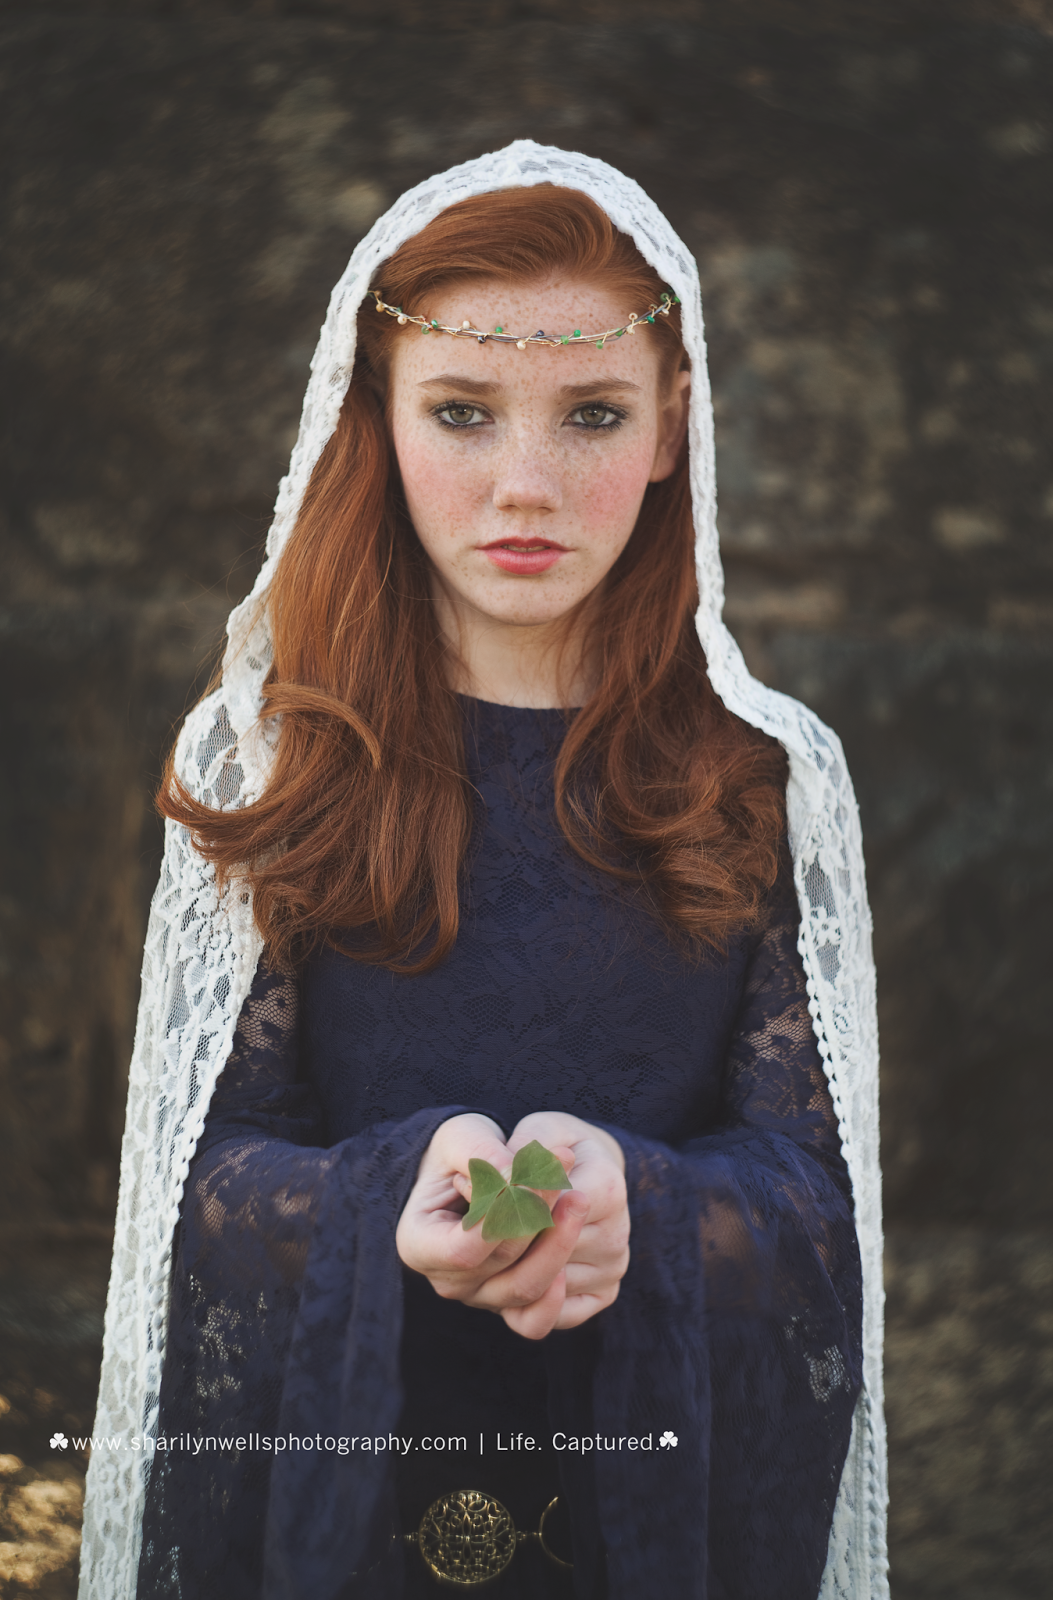 Sharilyn Wells Photography: Celtic Beauty | Concept | Fayetteville, NC ...